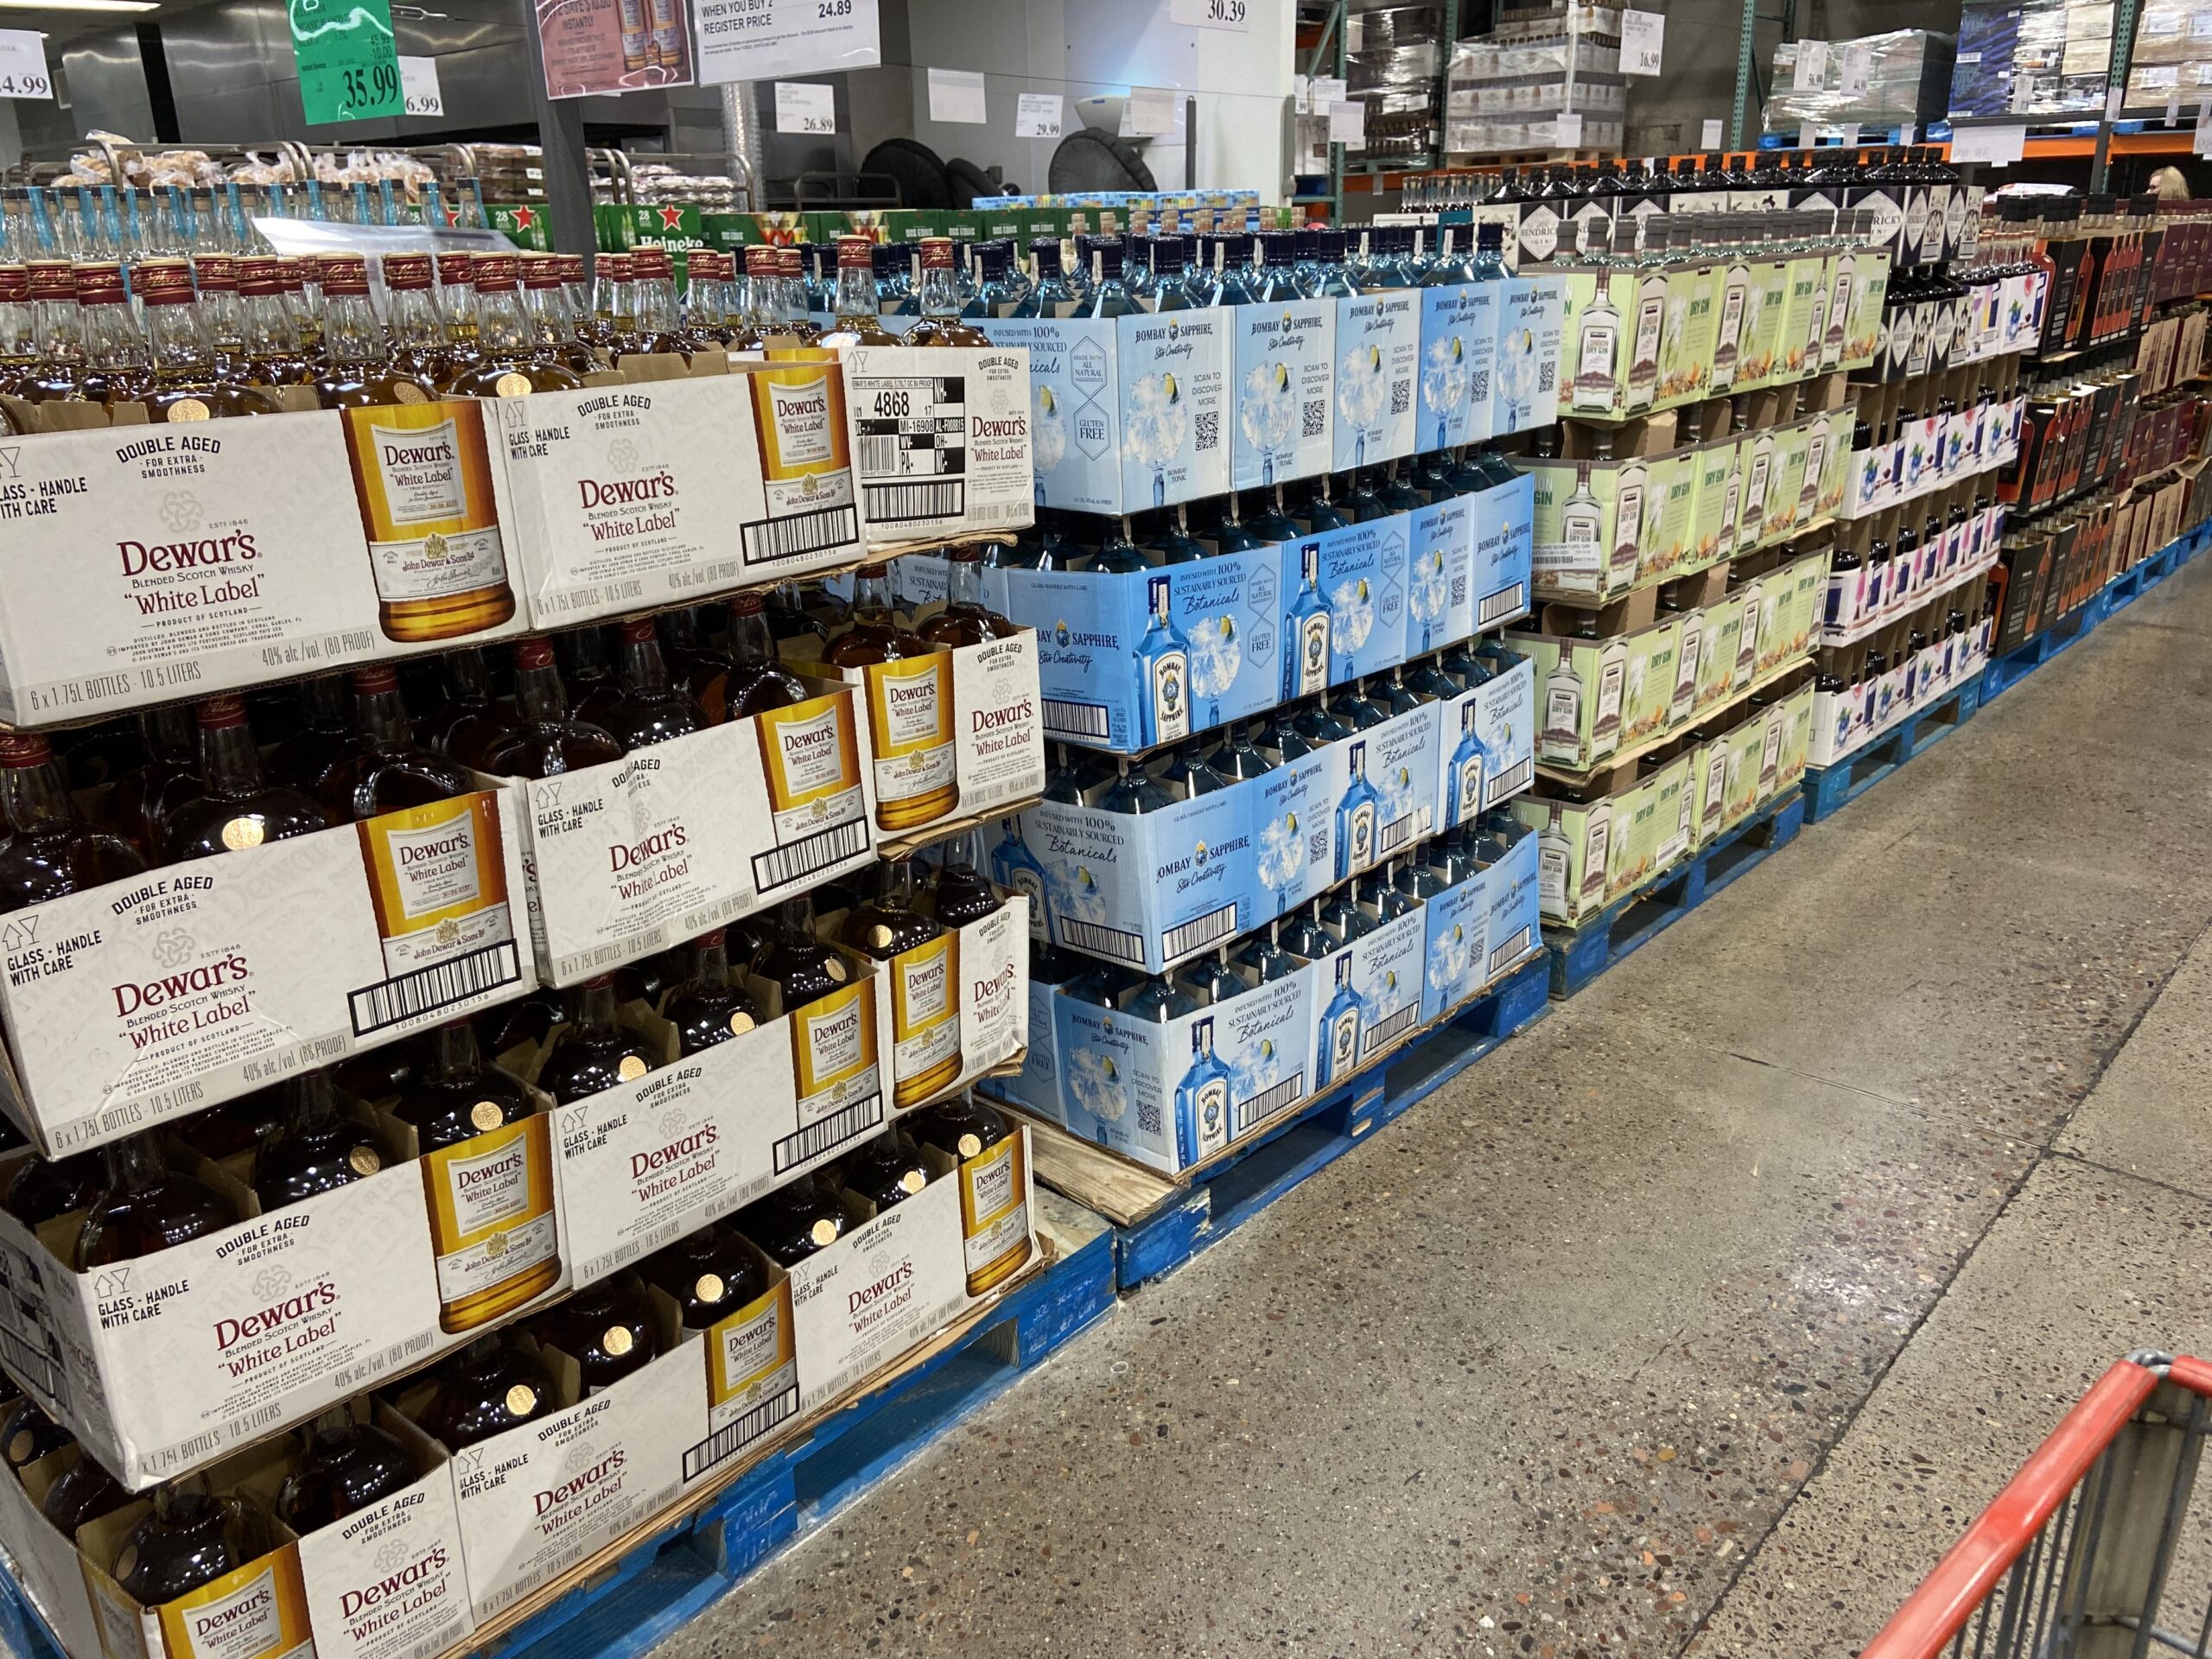 Aldi Now Selling Alcohol in Select New York Grocery Stores!